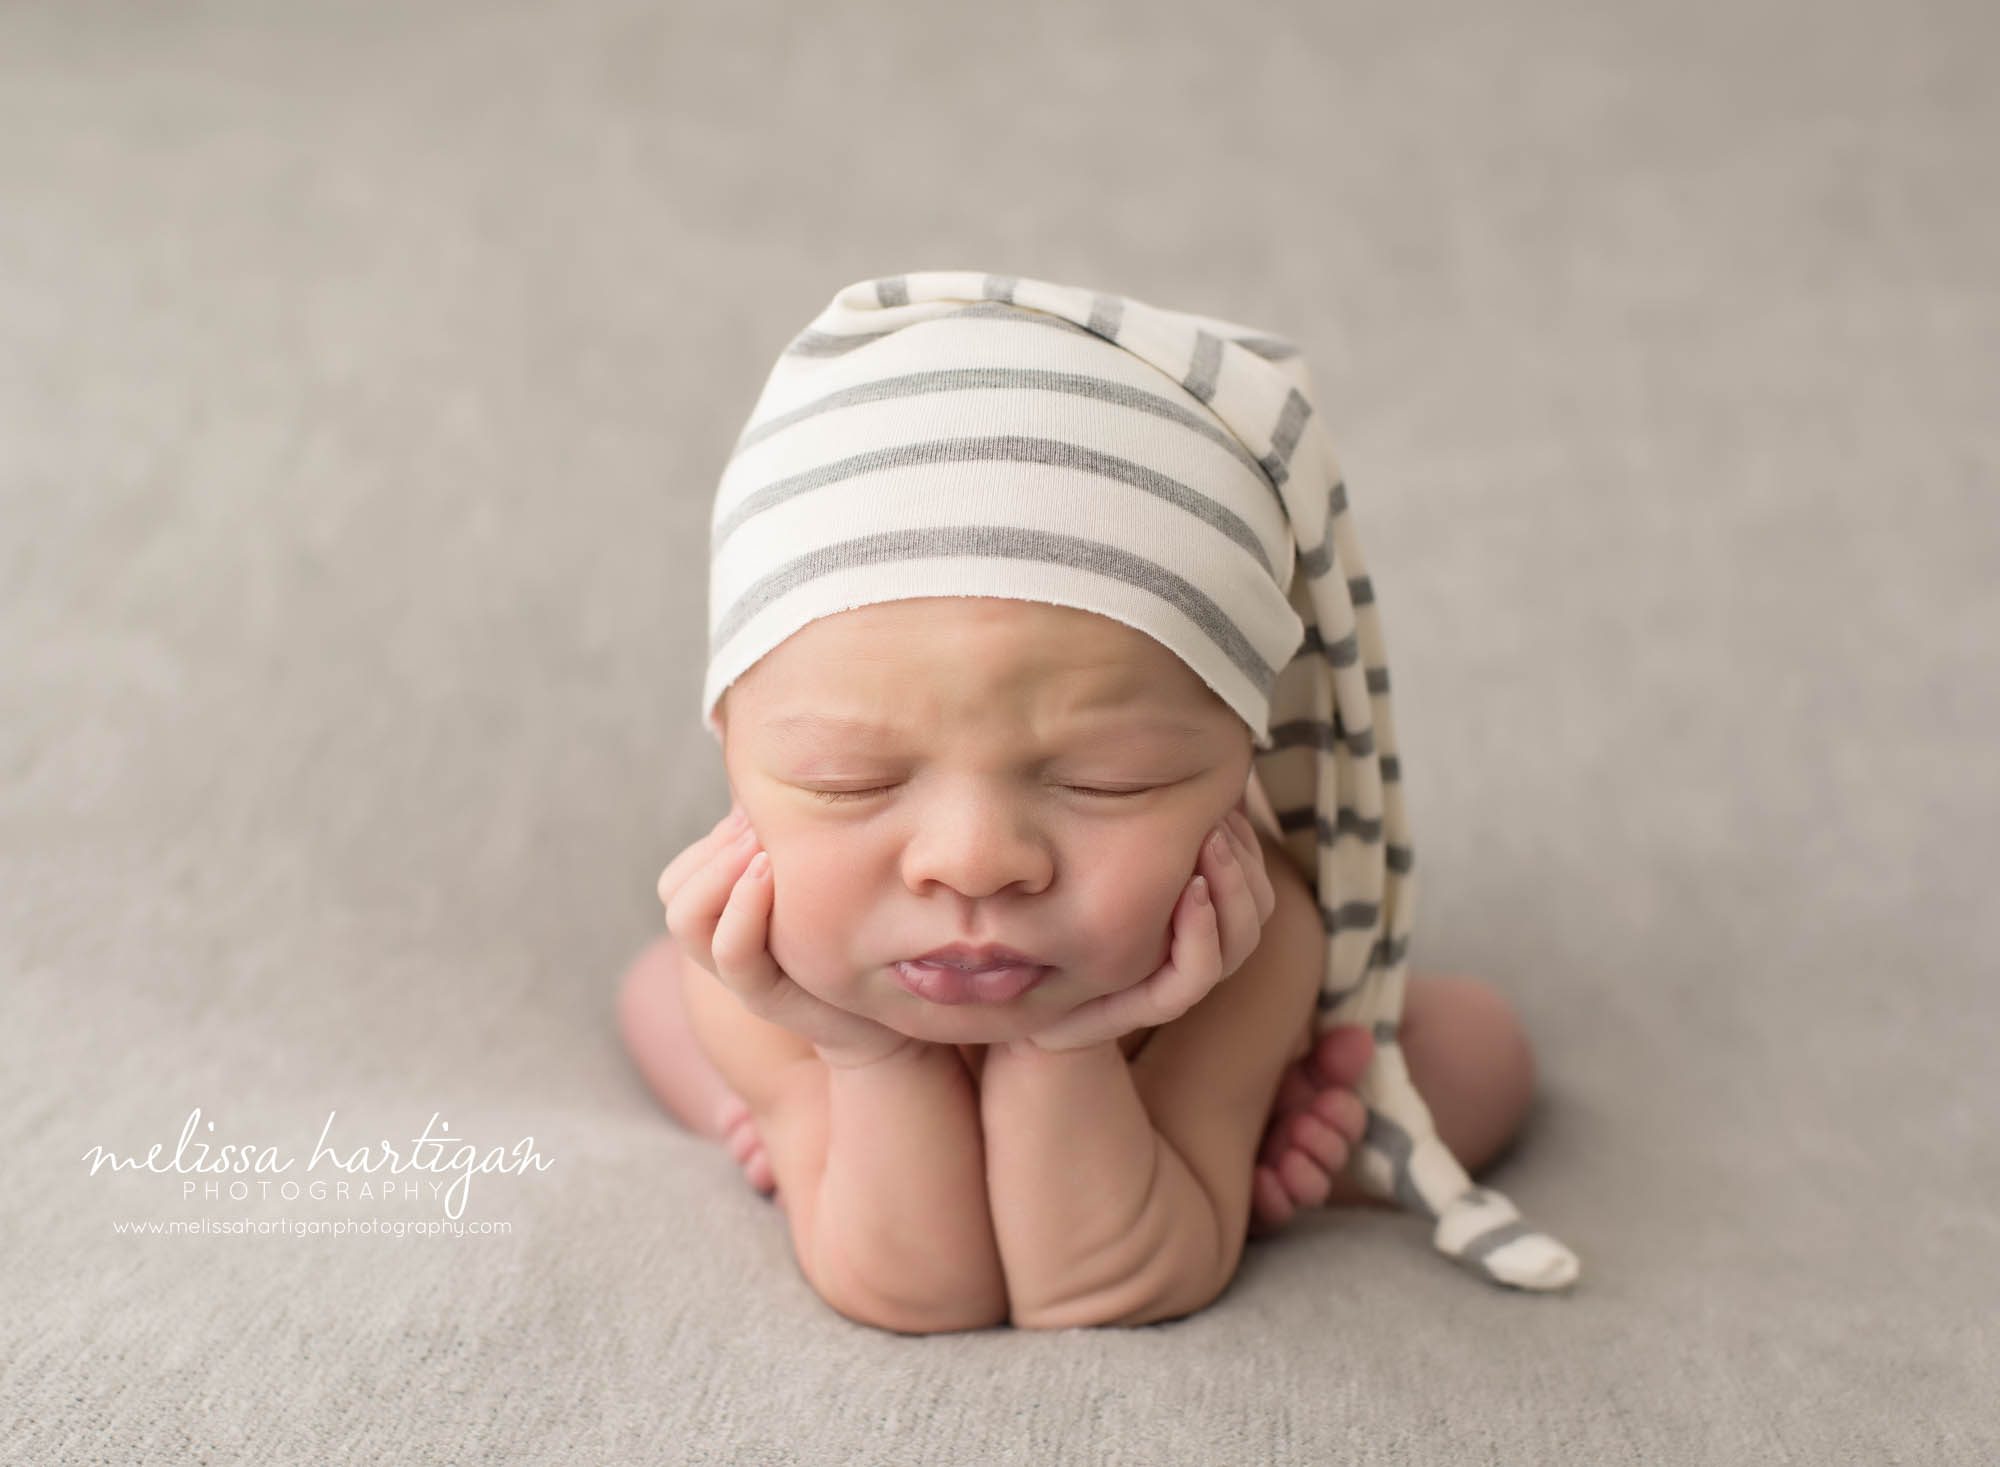 Newborn baby boy posed froggy pose wearing cream and gray striped sleepy cap North Haven CT baby photography